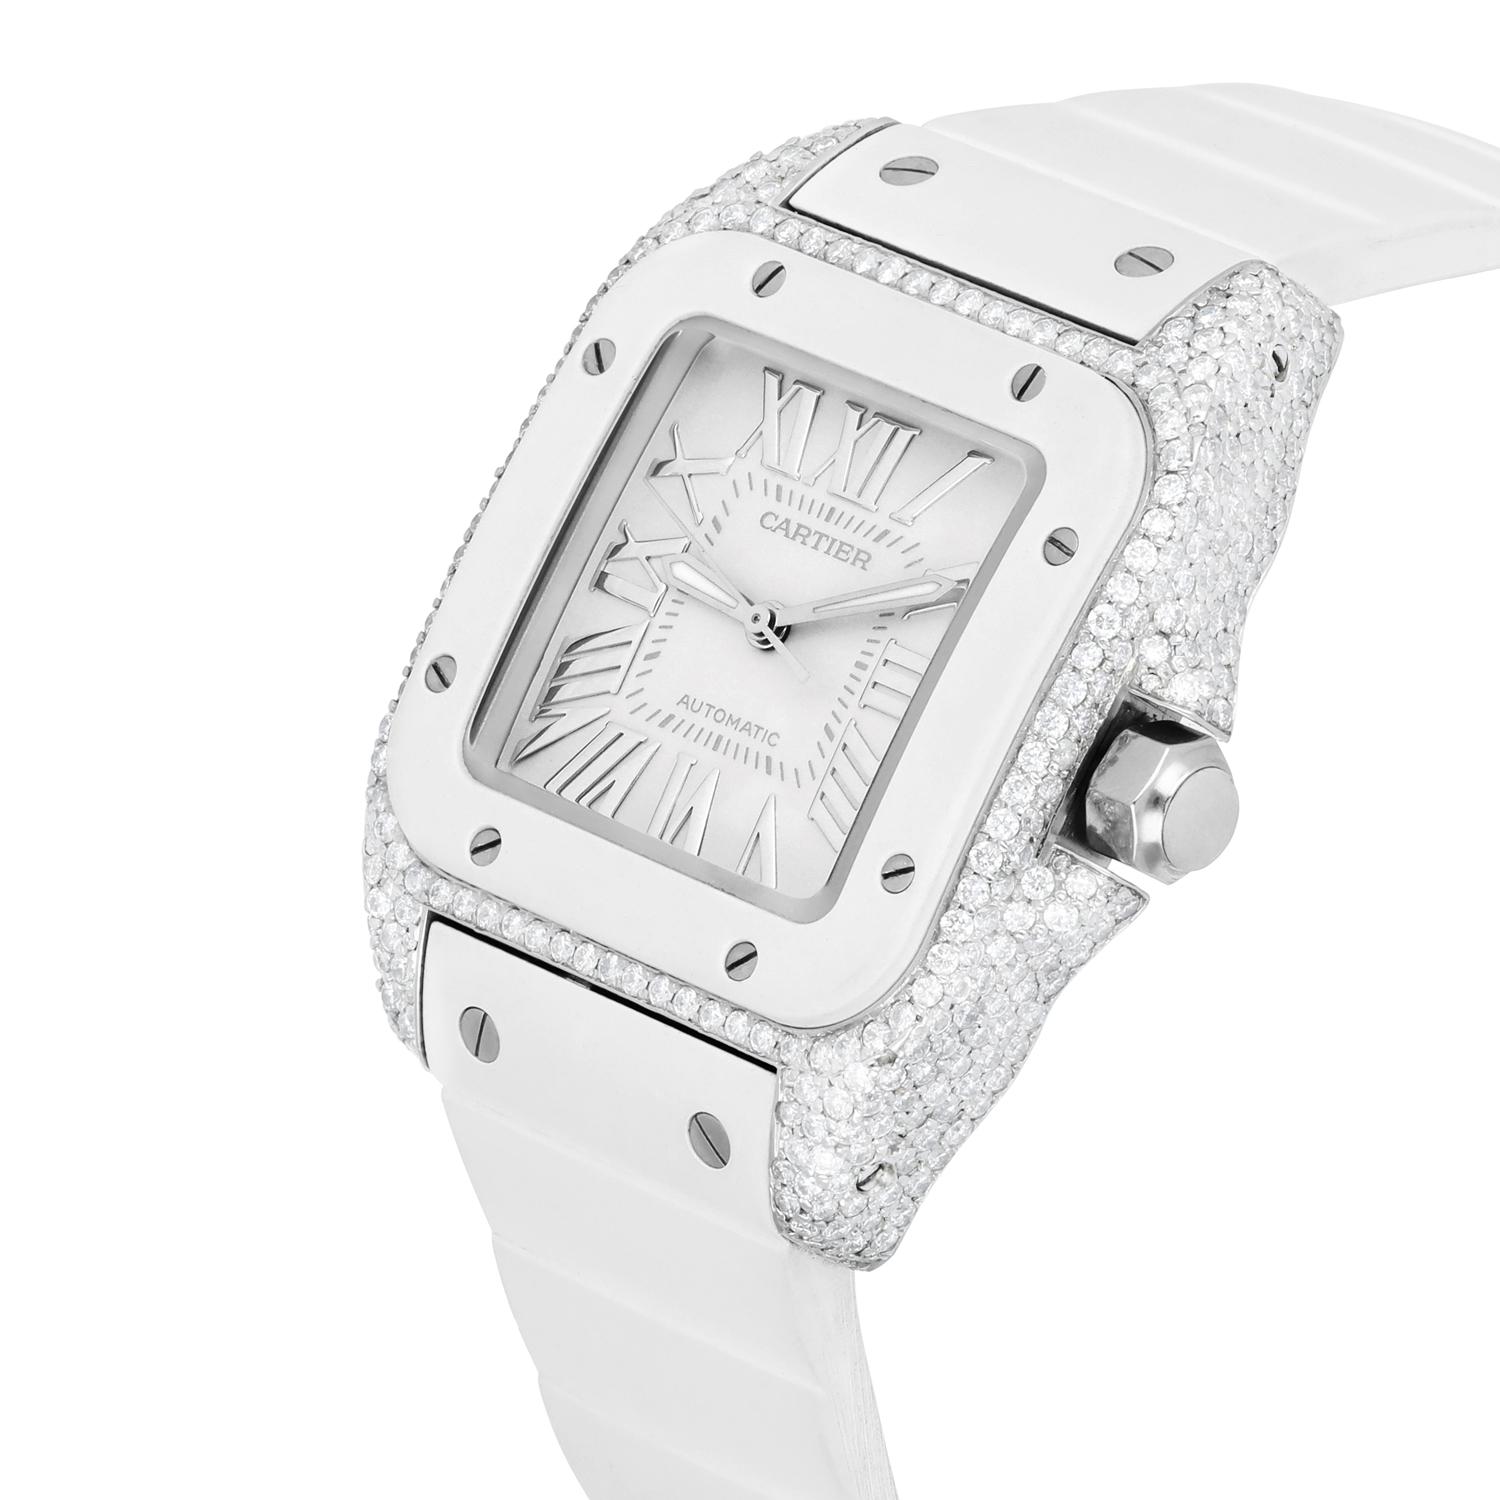 Cartier Santos 100 Staniless Steel 33mm Diamond Watch White Rubber Strap #2878 In Excellent Condition For Sale In New York, NY